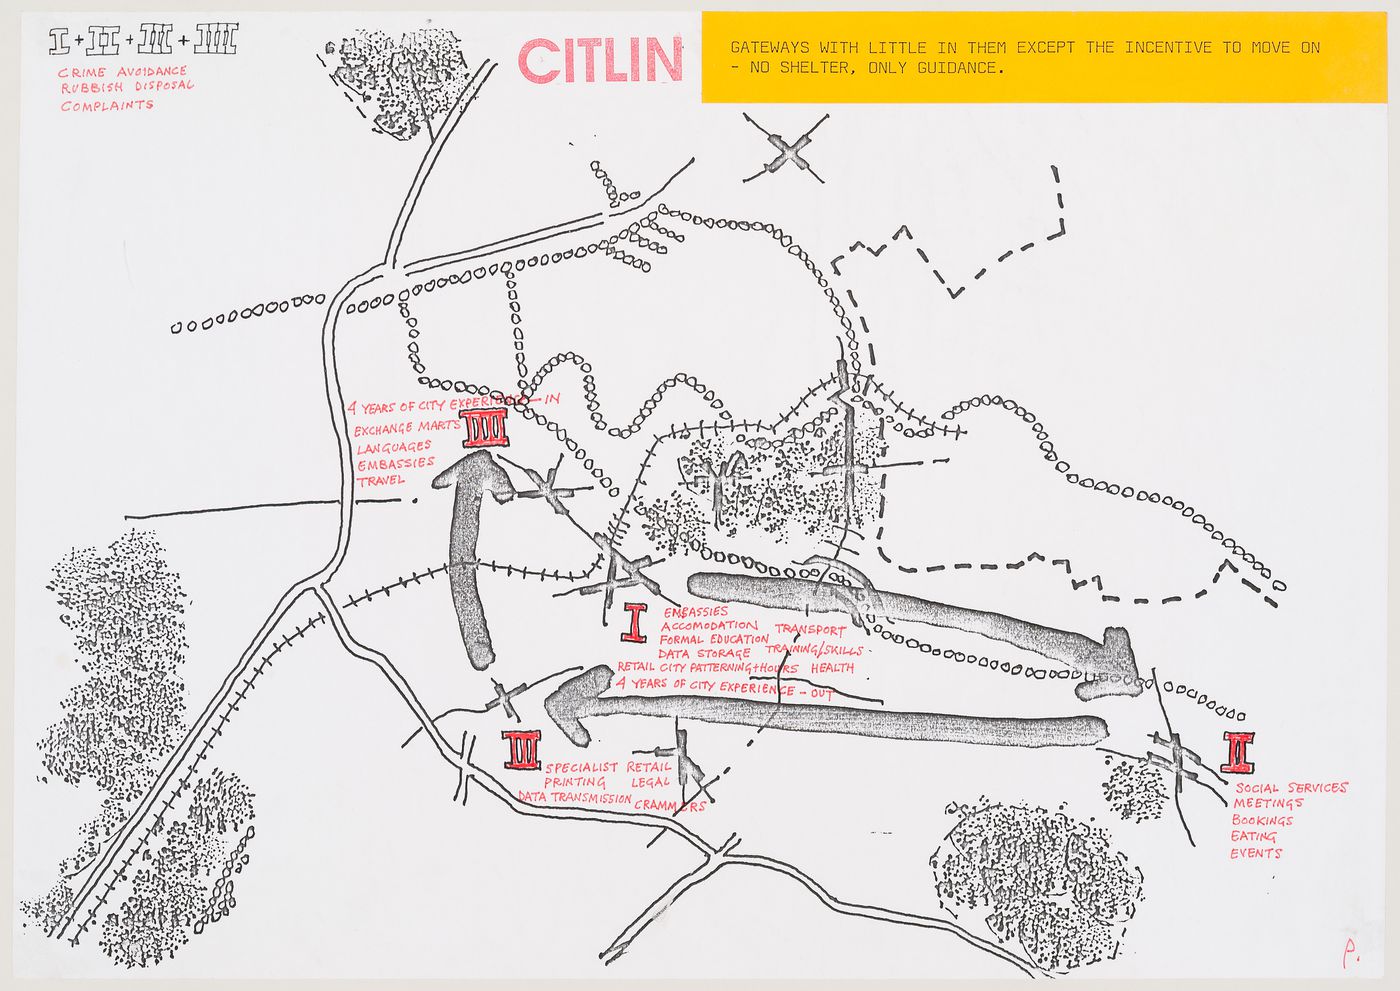 Citlin: plan showing proposed locations for four gateways in Berlin, Germany, and the sequence in which they are meant to be visited